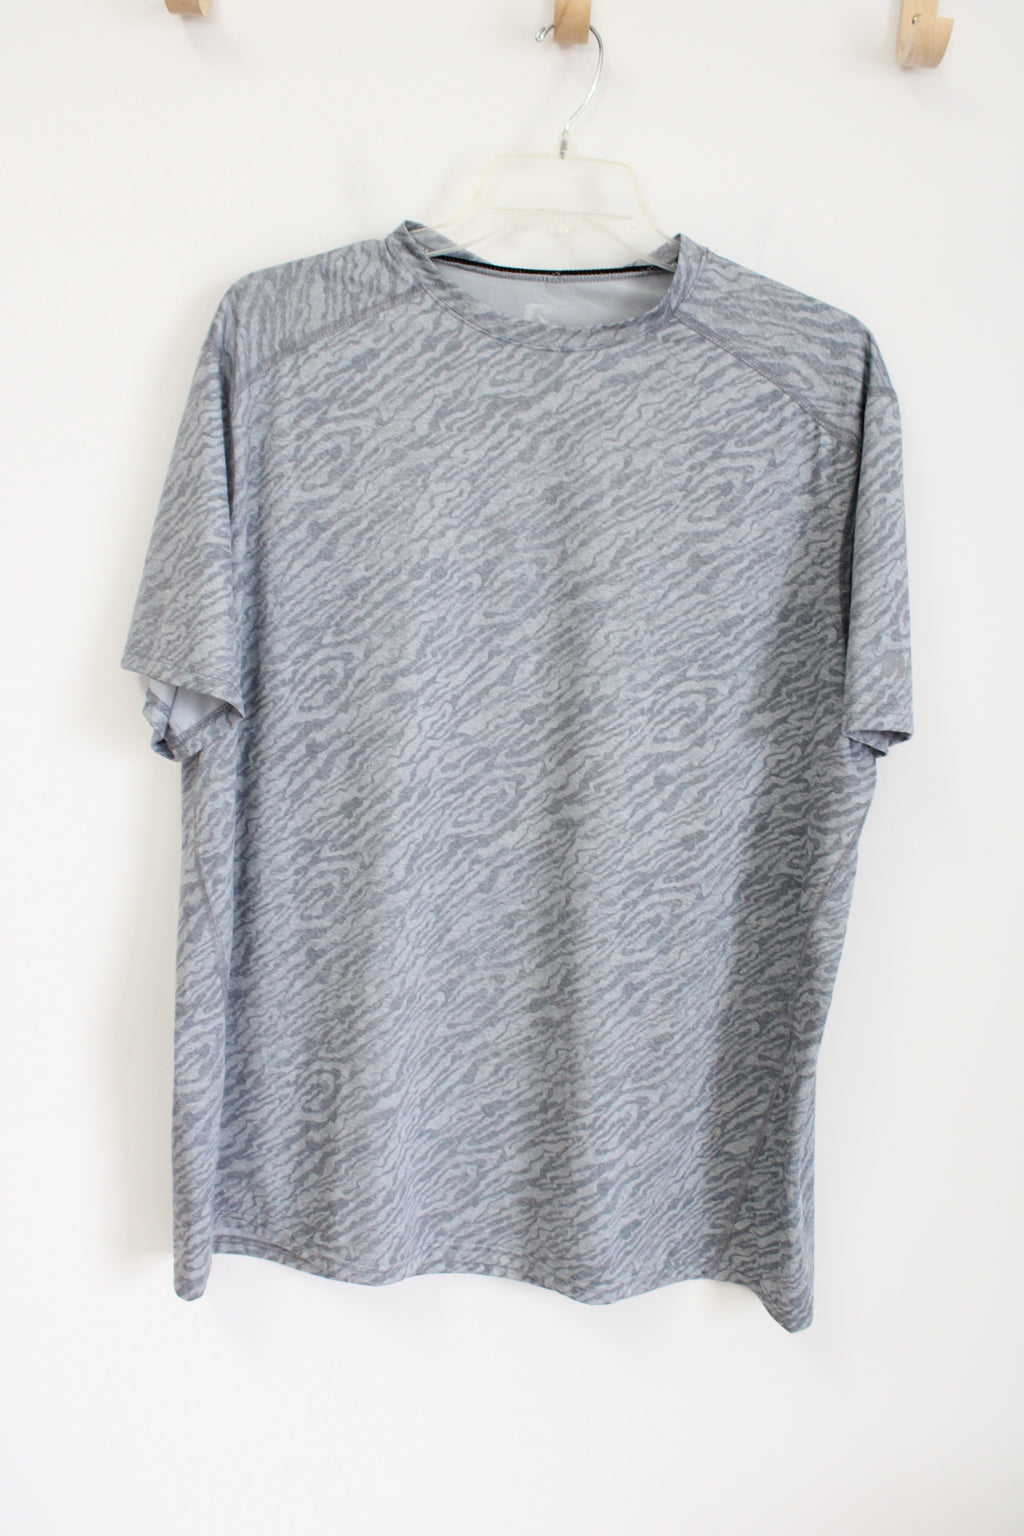 Russell Training Fit Gray Shirt | 2XL